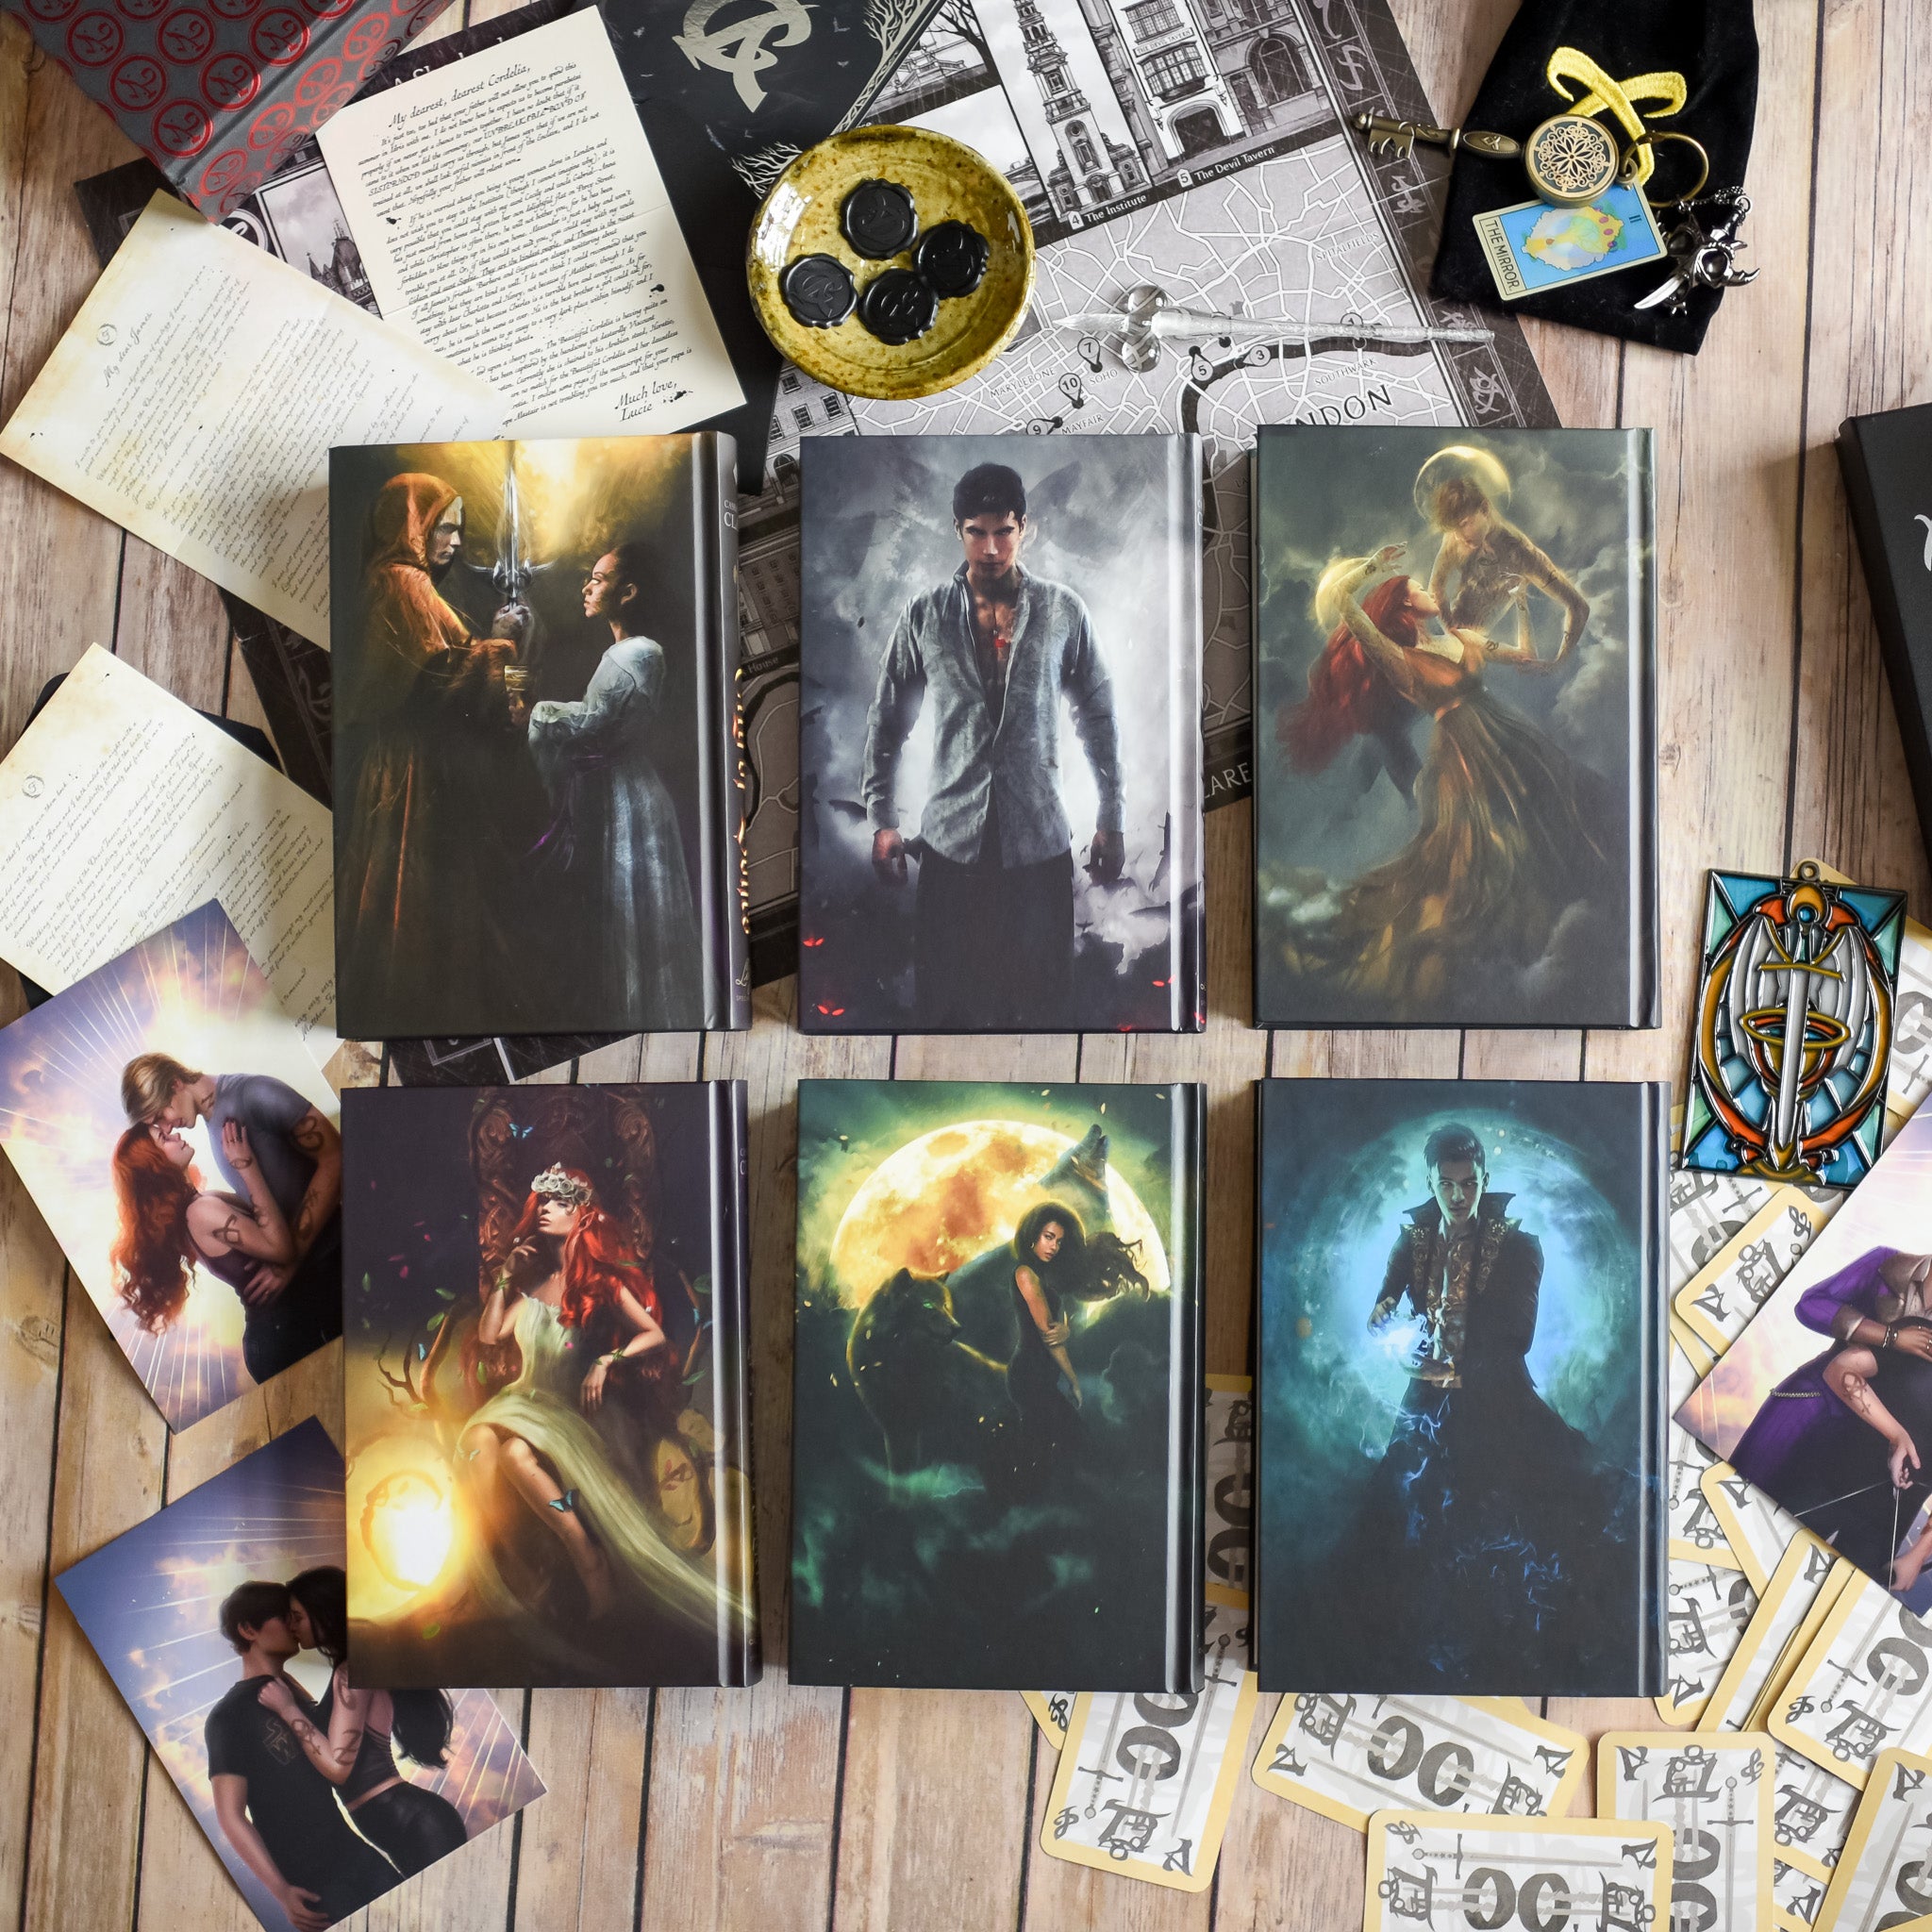 the mortal instruments character posters